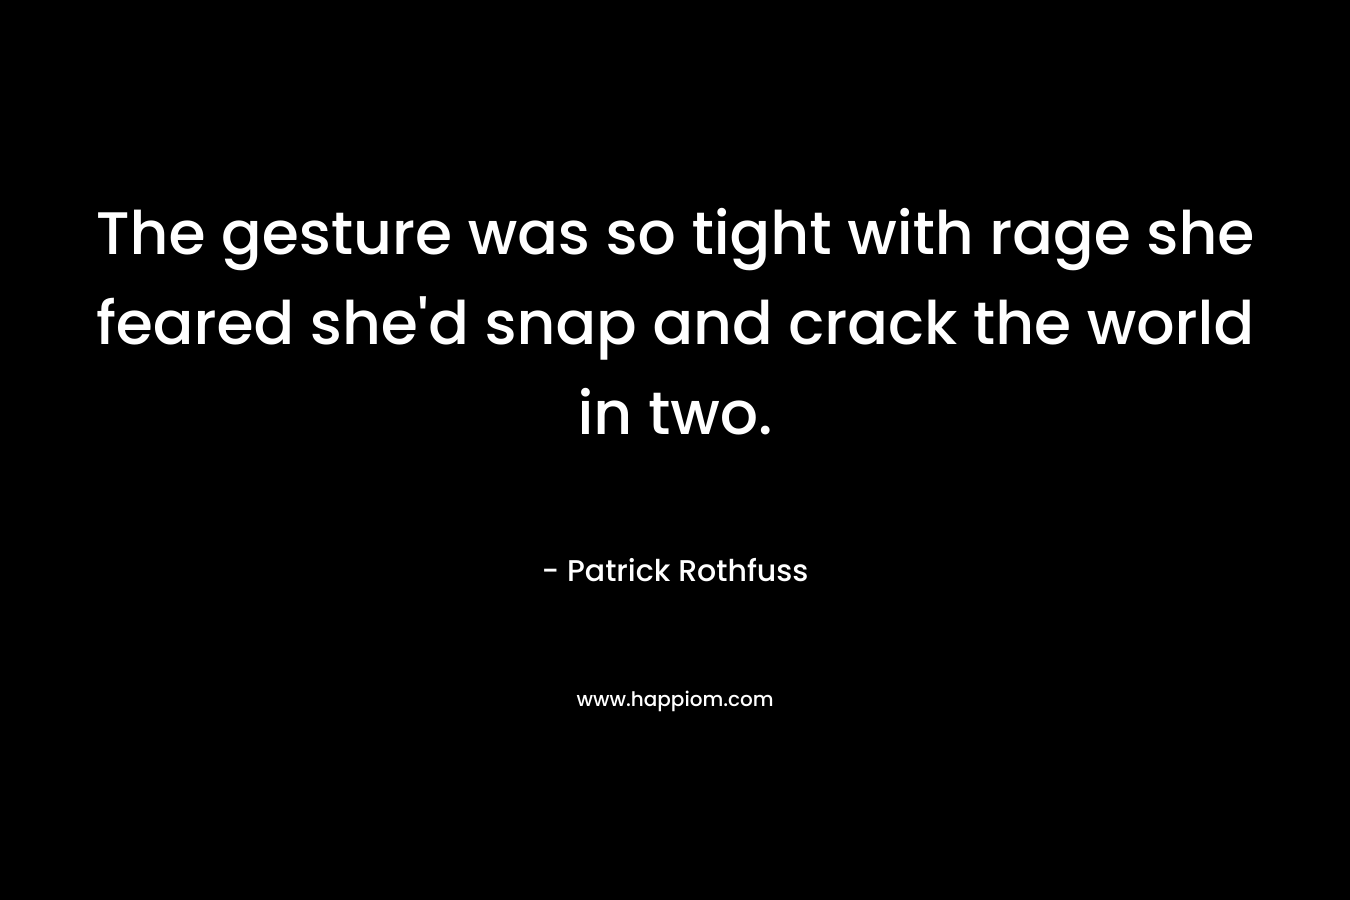 The gesture was so tight with rage she feared she’d snap and crack the world in two. – Patrick Rothfuss